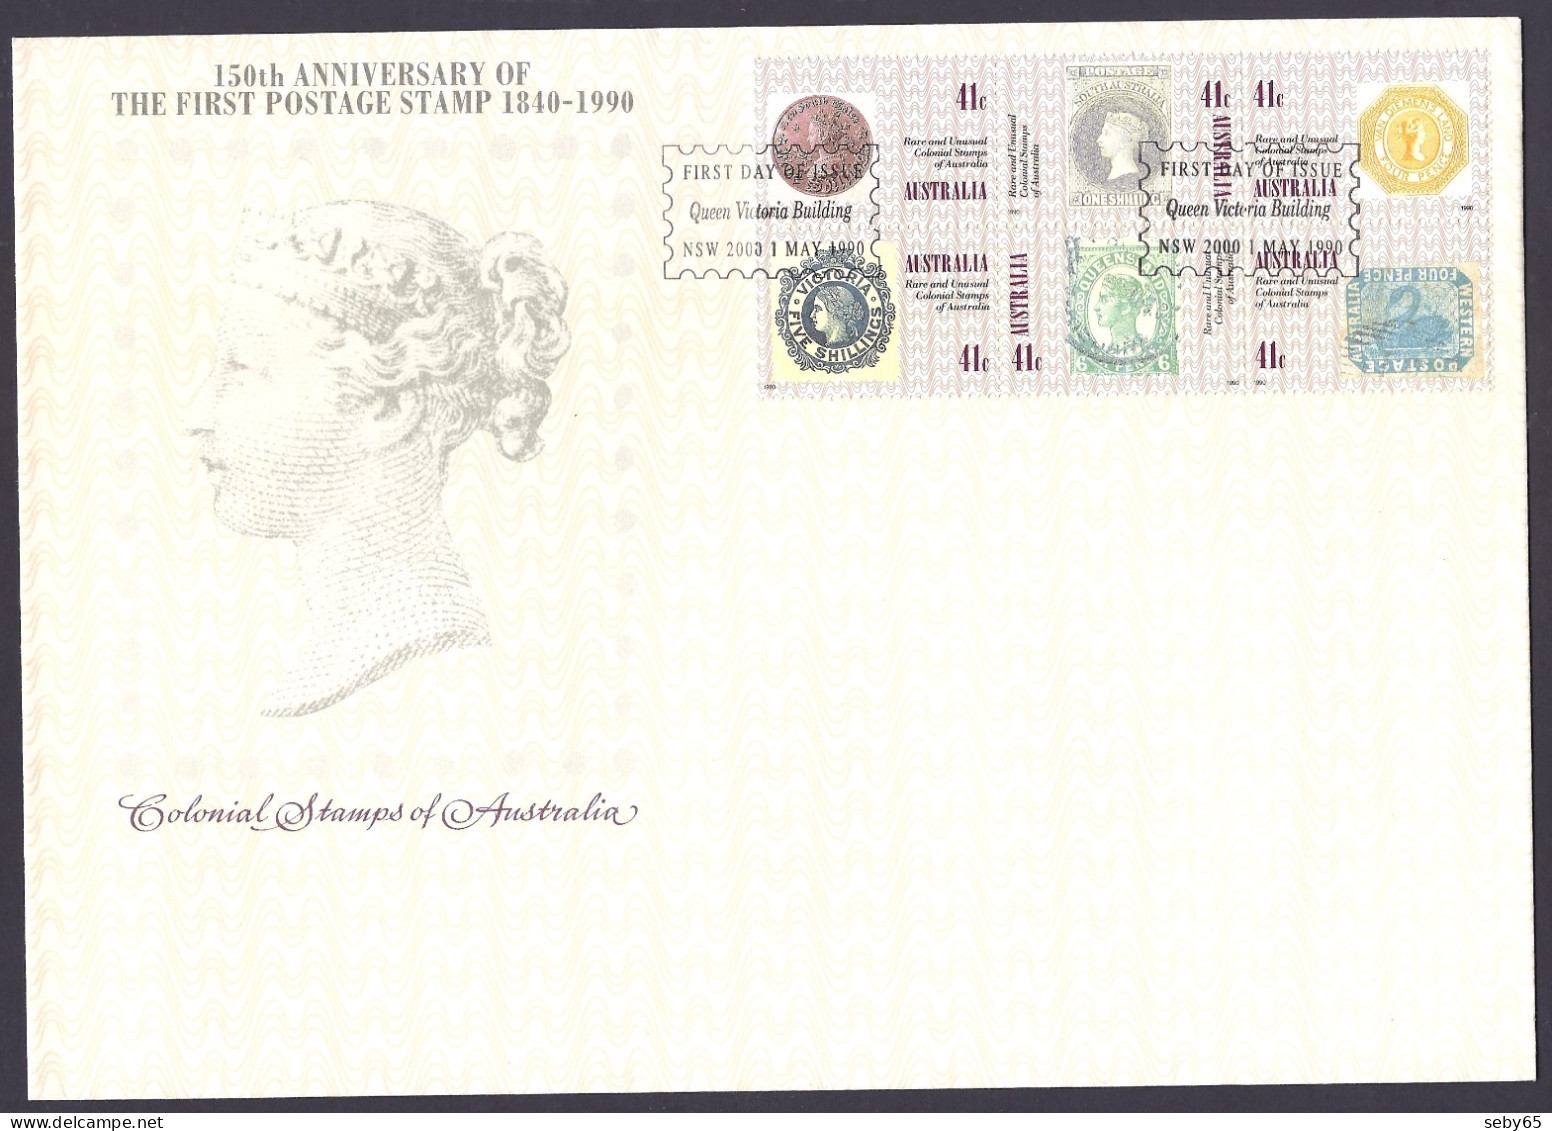 Australia 1990 - 150th Anniversary First Postage Stamp, Colonial Stamps, Rare And Unusual - FDC - Sobre Primer Día (FDC)